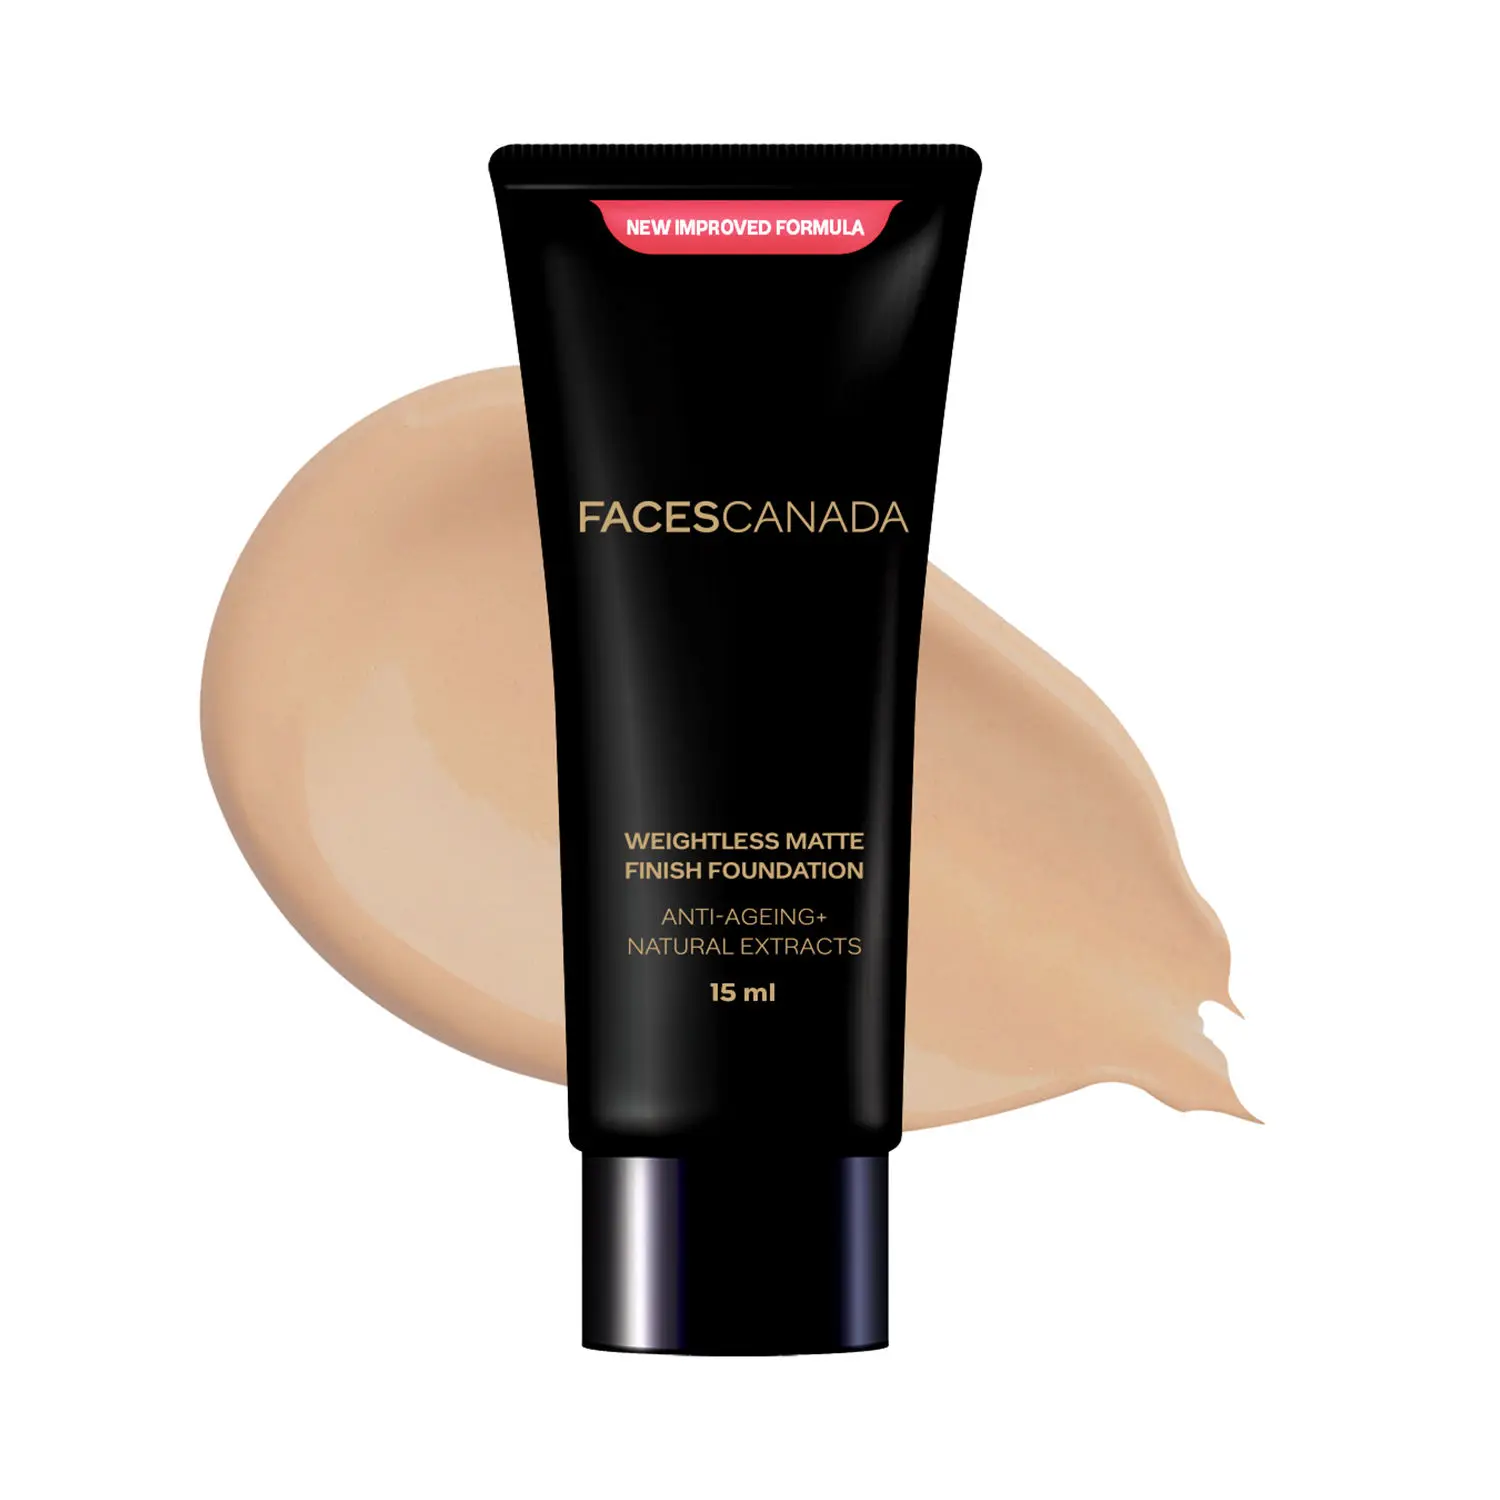 FACES CANADA Weightless Matte Finish Foundation Sand 06 15ml I Anti-ageing I Non-clog Pores I Lightweight I Olive Seed Oil I Grape Extract I Shea Butter I Cruelty-free I Paraben-free